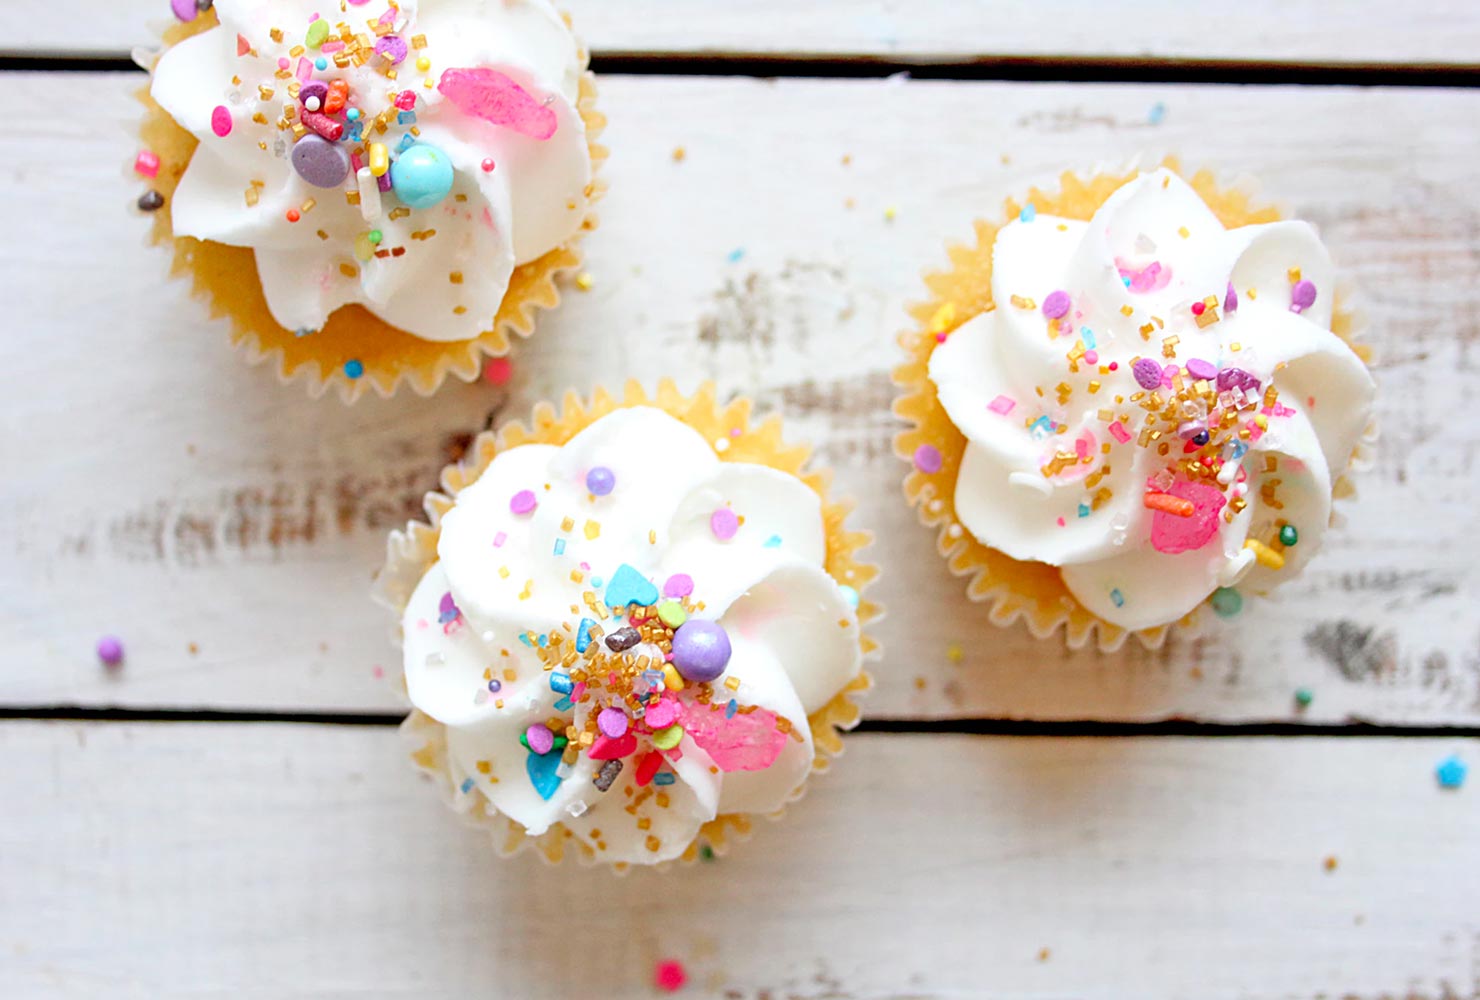 Cupcakes with colorful sprinkles.